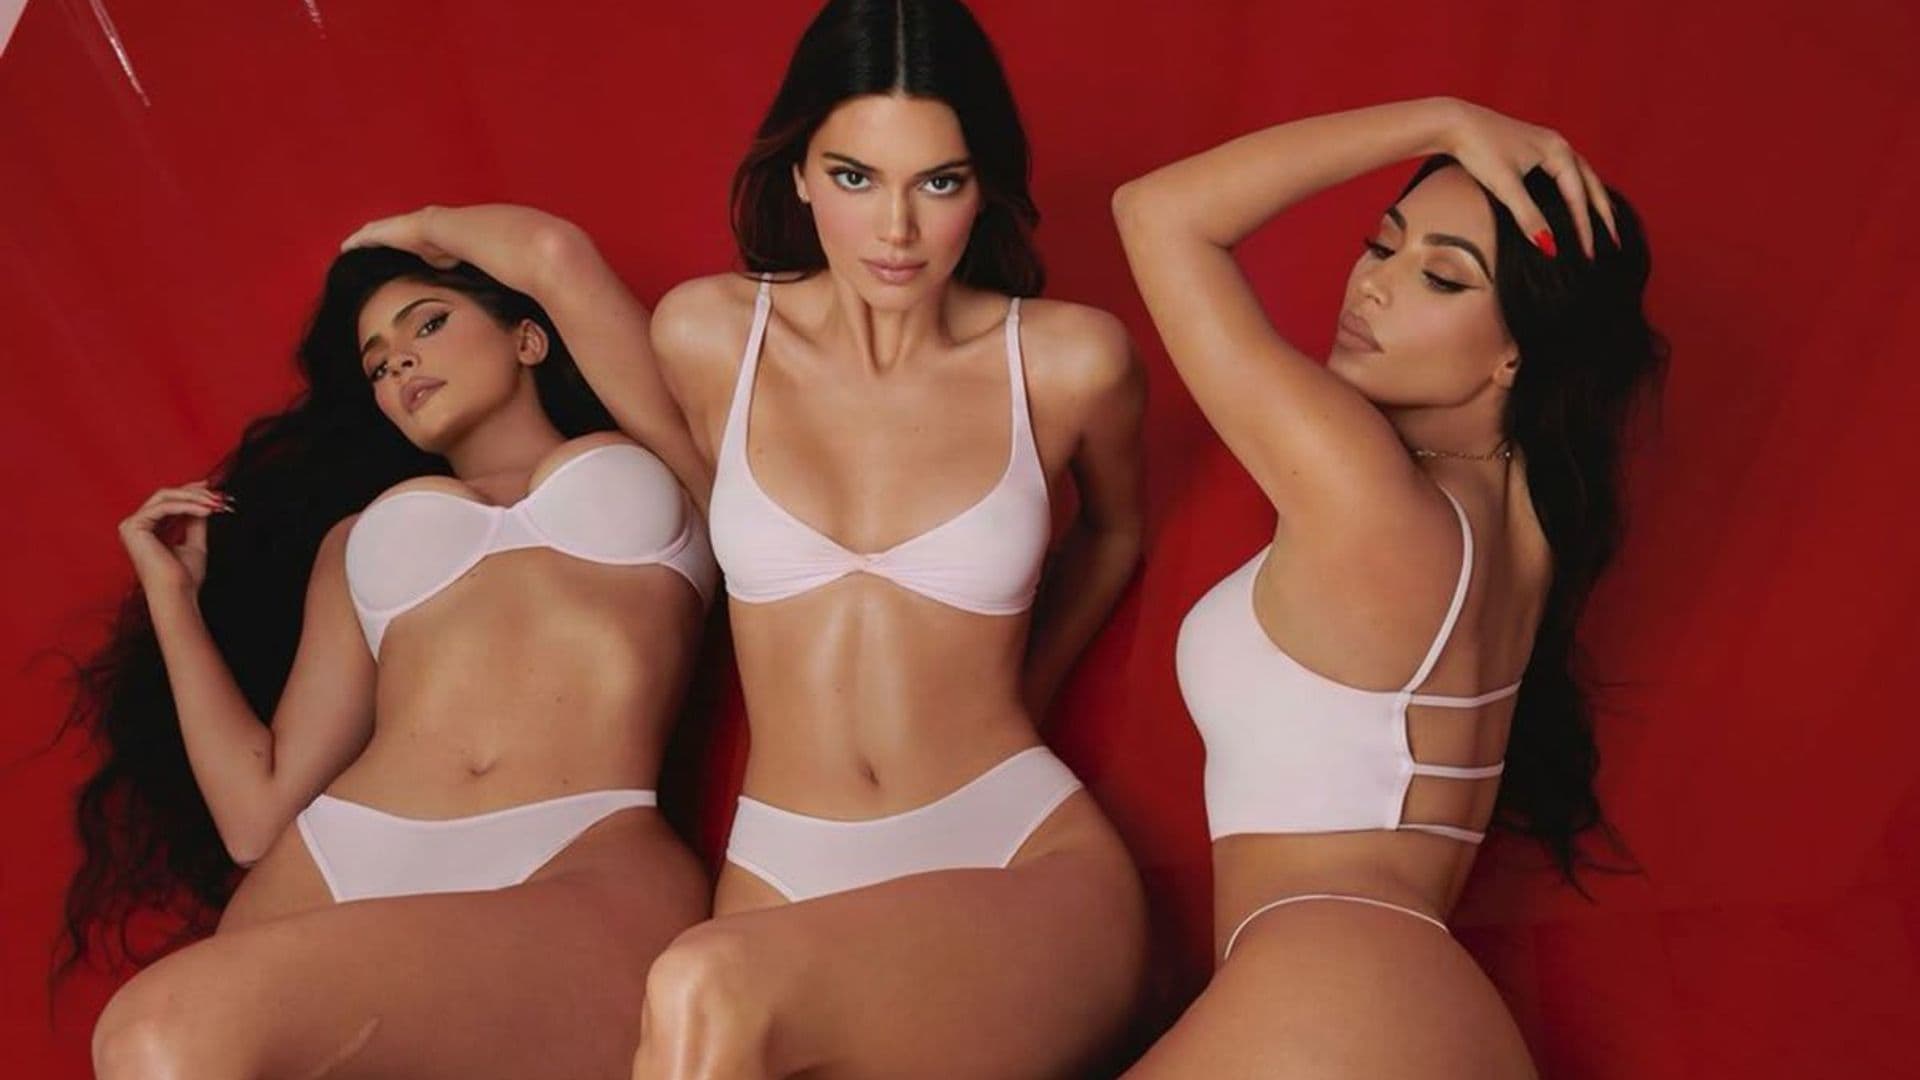 Kylie and Kendall Jenner pose with Kim Kardashian for Skims